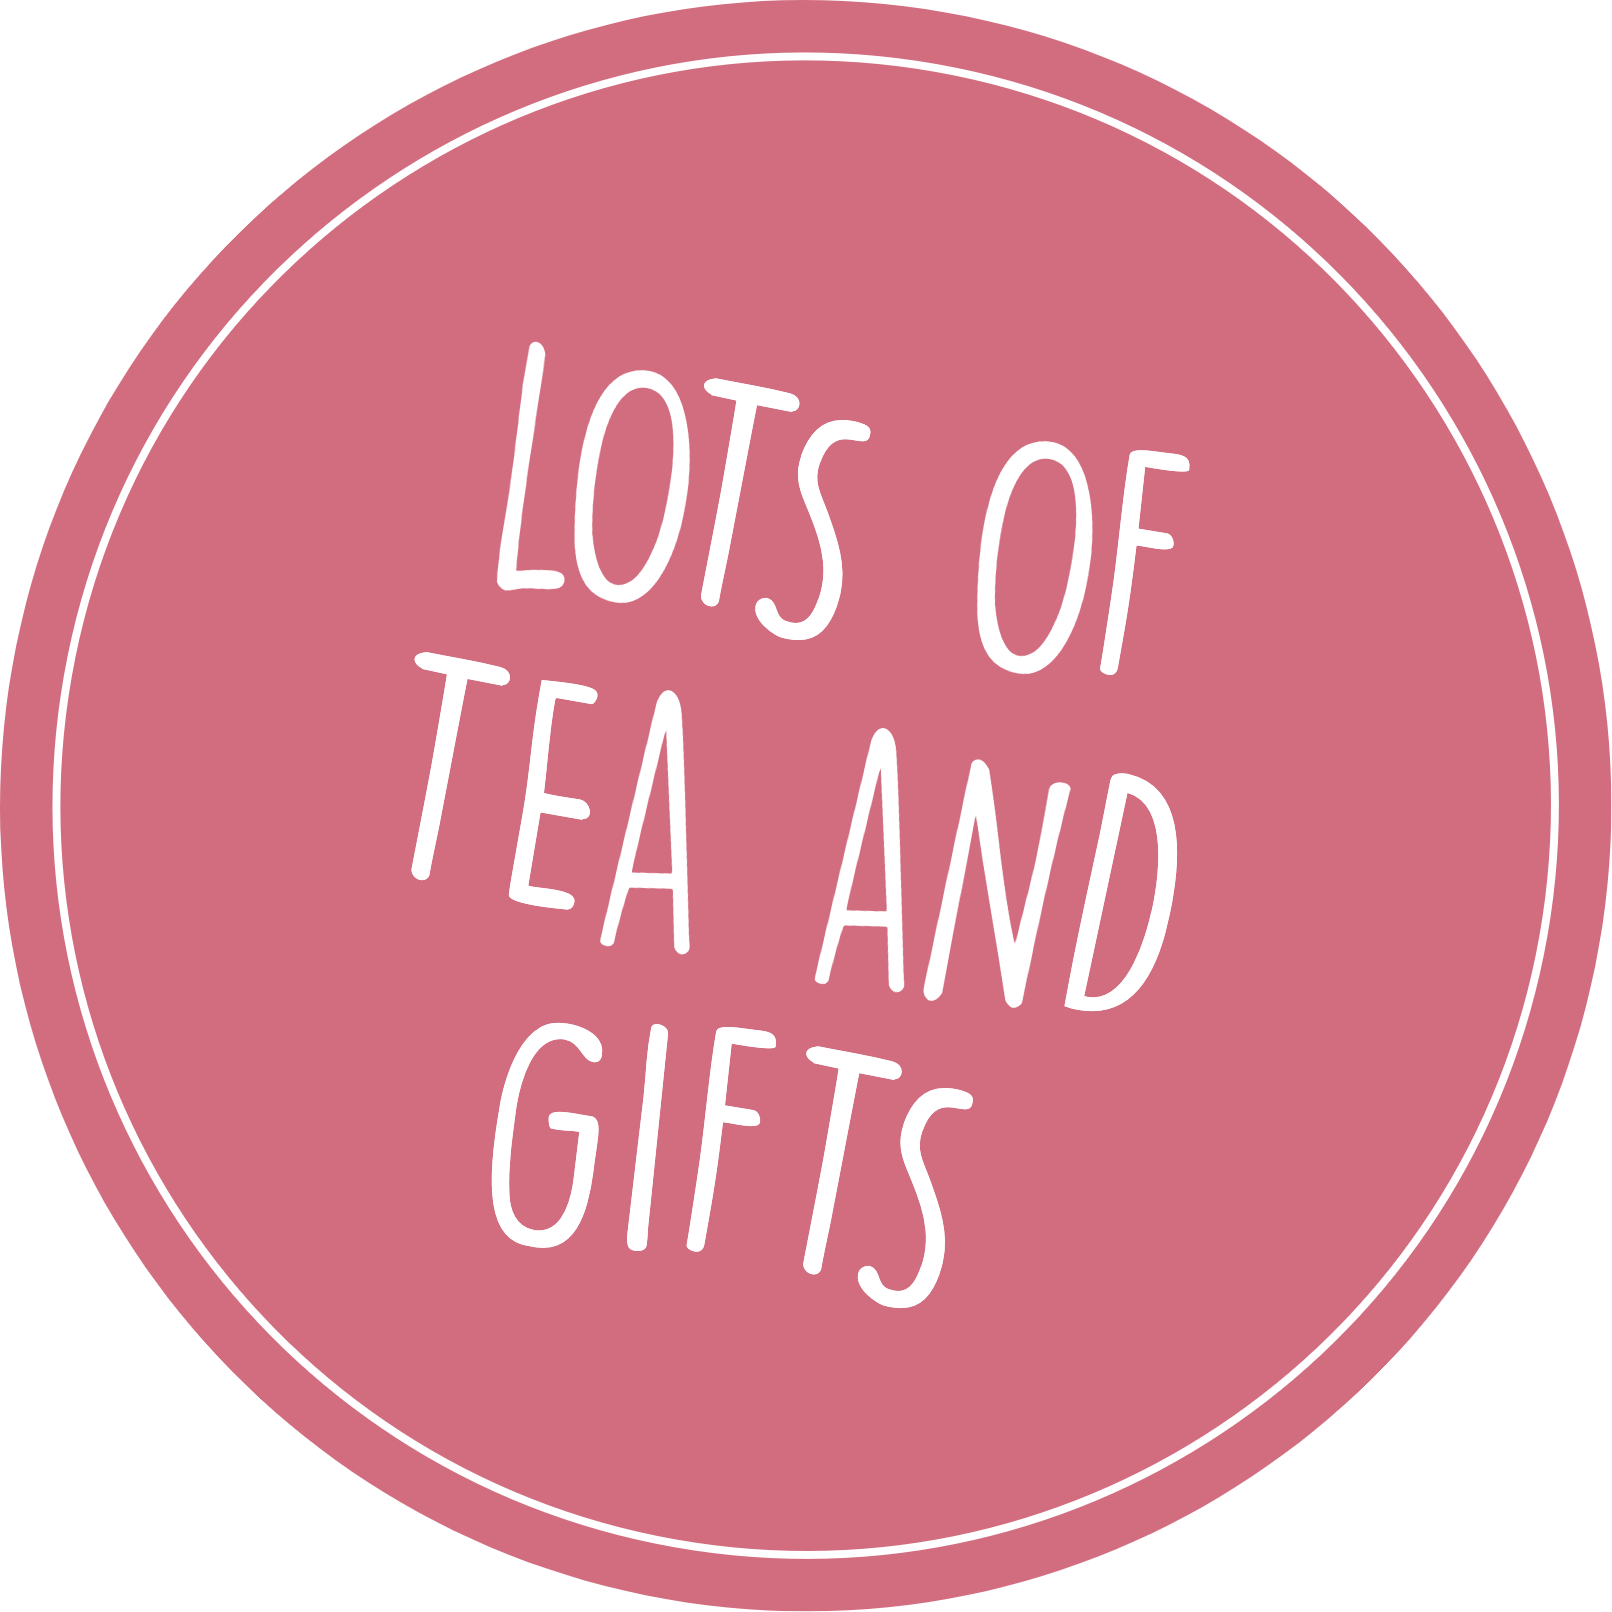 Lots of tea and gifts